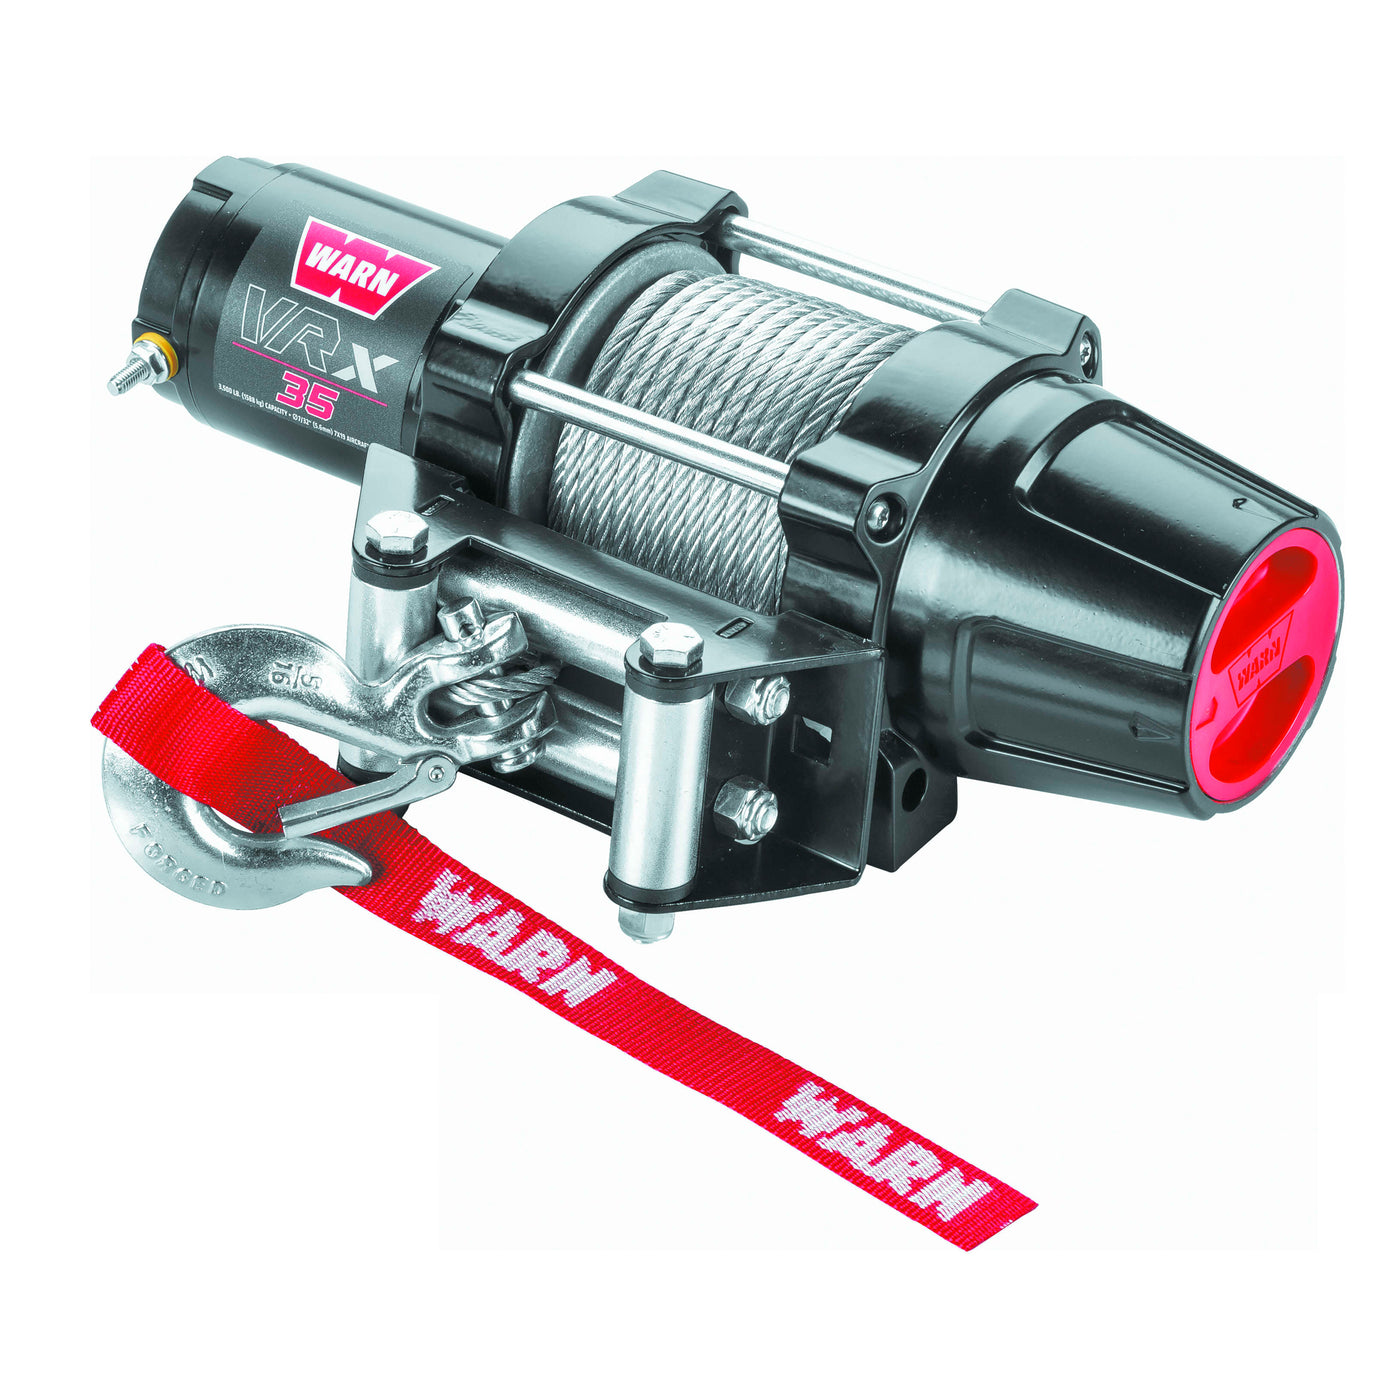 Warn VRX 3500 Winch With Wire Rope